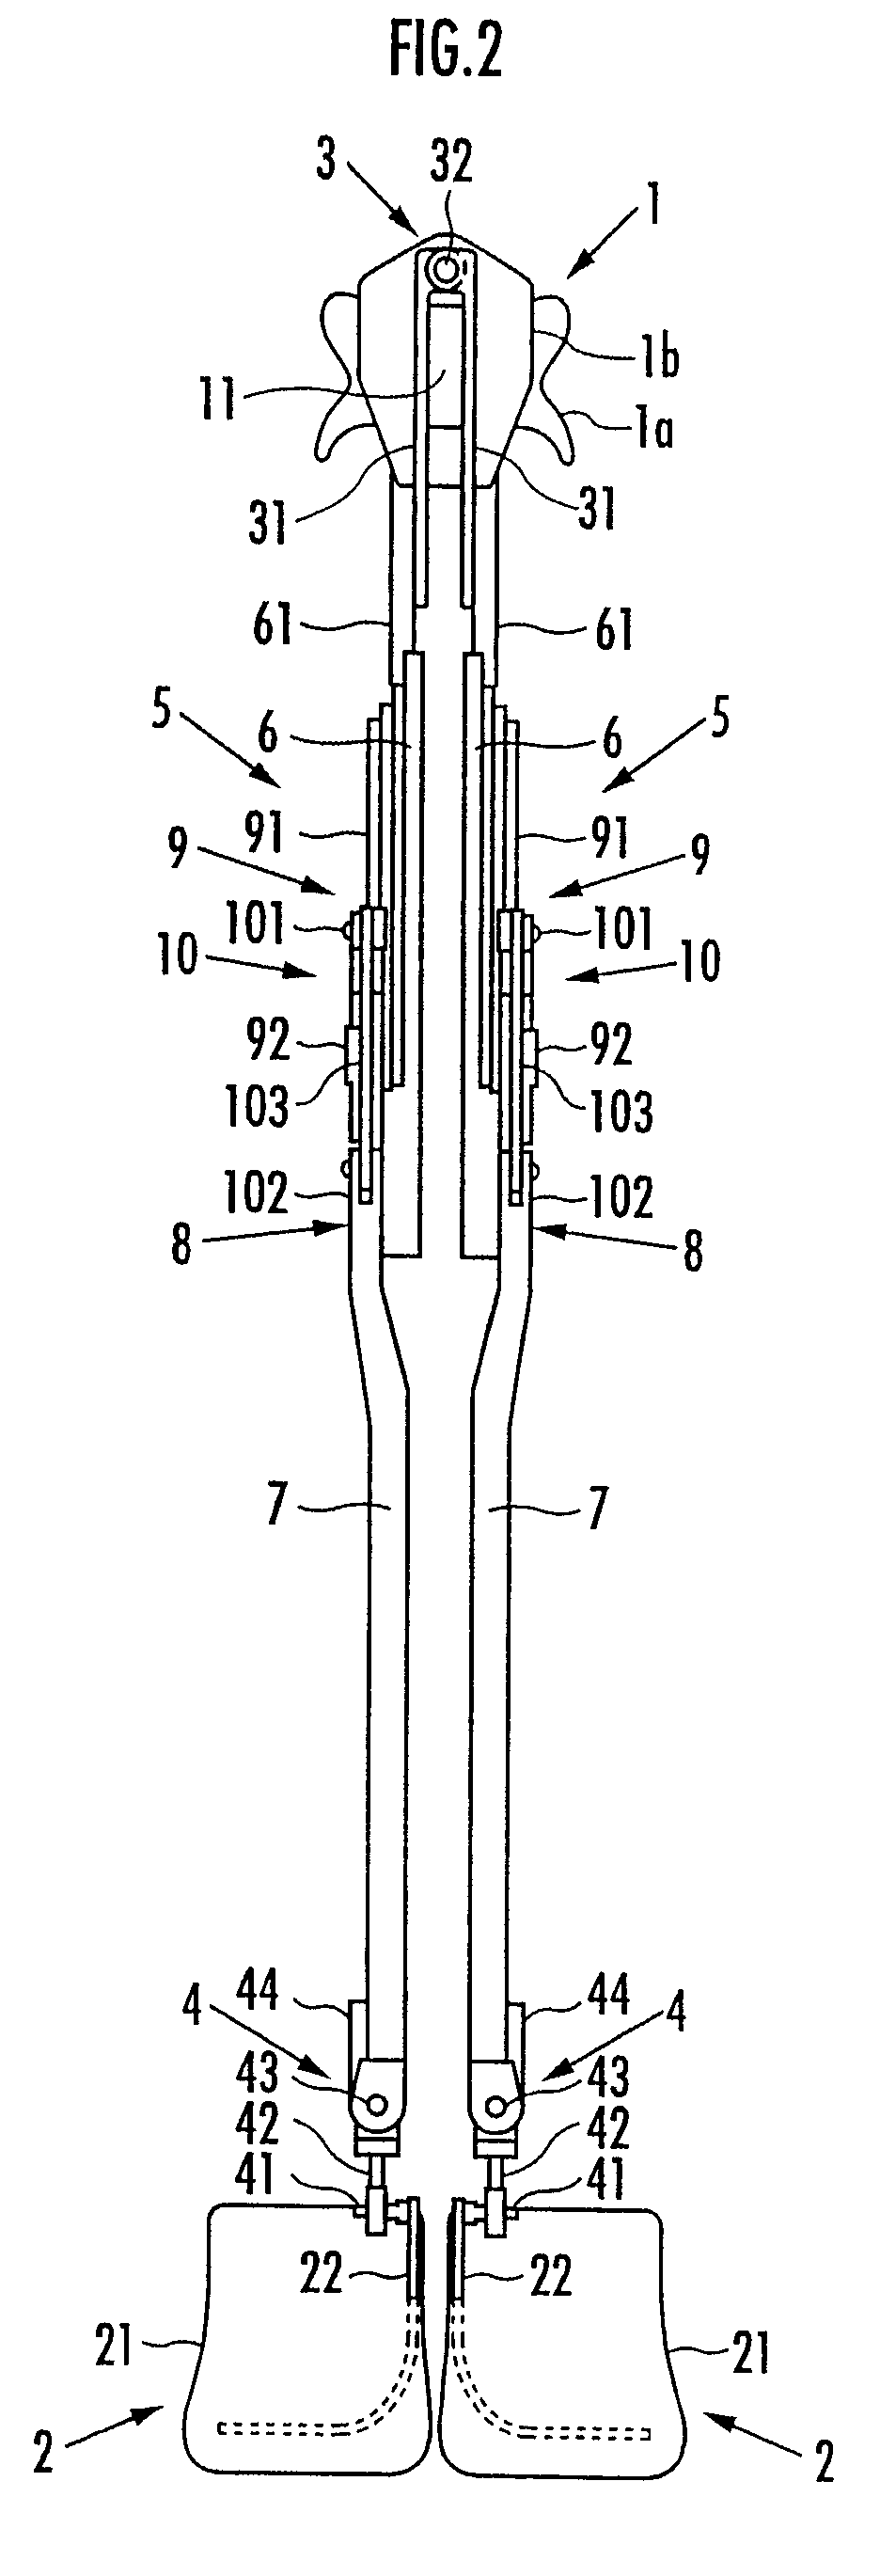 Walk supporting device